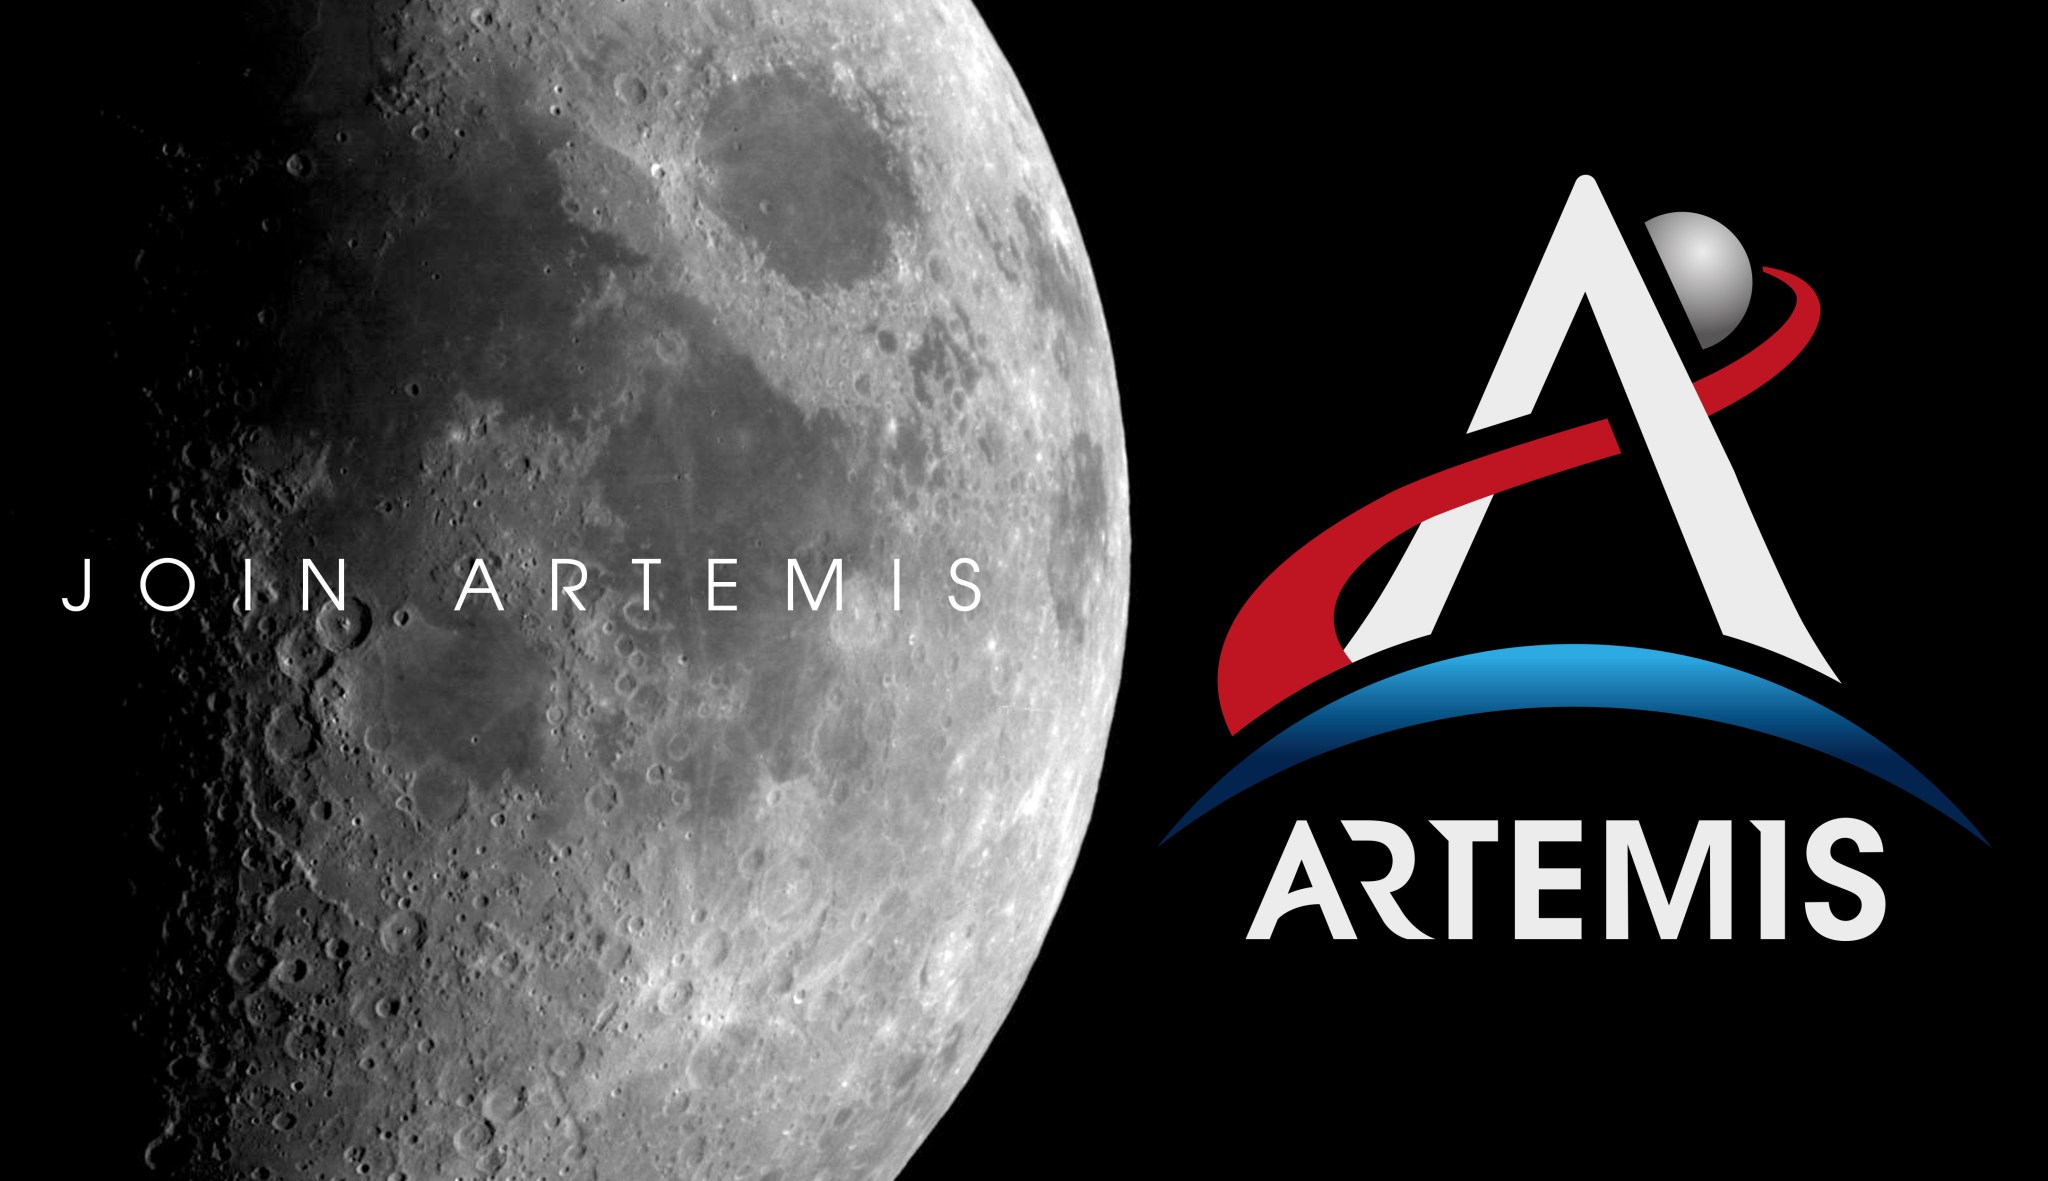 Image of the Moon and Artemis Logo